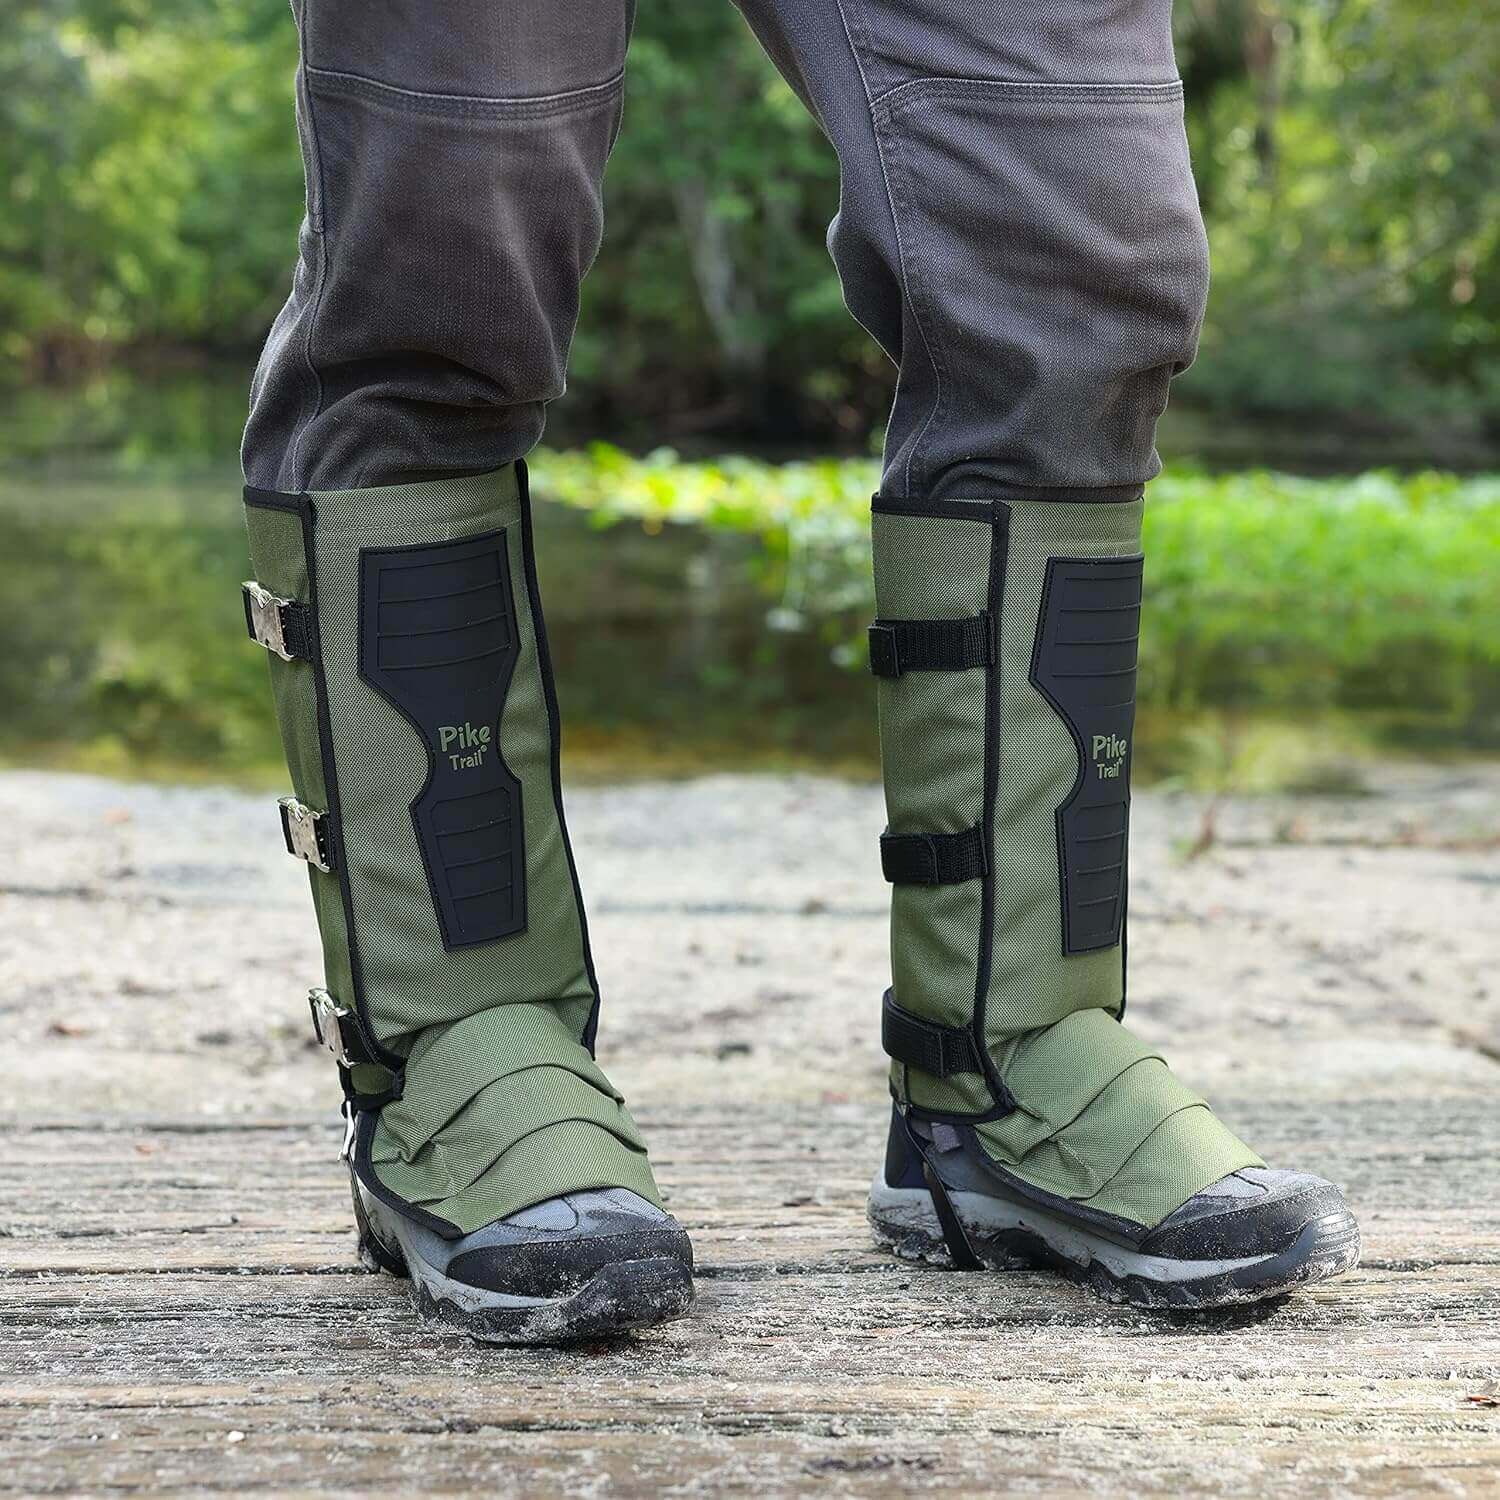 Shop The Latest >Pike Trail Snake Gaiters Leg Guards for Snake Bite Protection > *Only $68.99*> From The Top Brand > *Pike Traill* > Shop Now and Get Free Shipping On Orders Over $45.00 >*Shop Earth Foot*